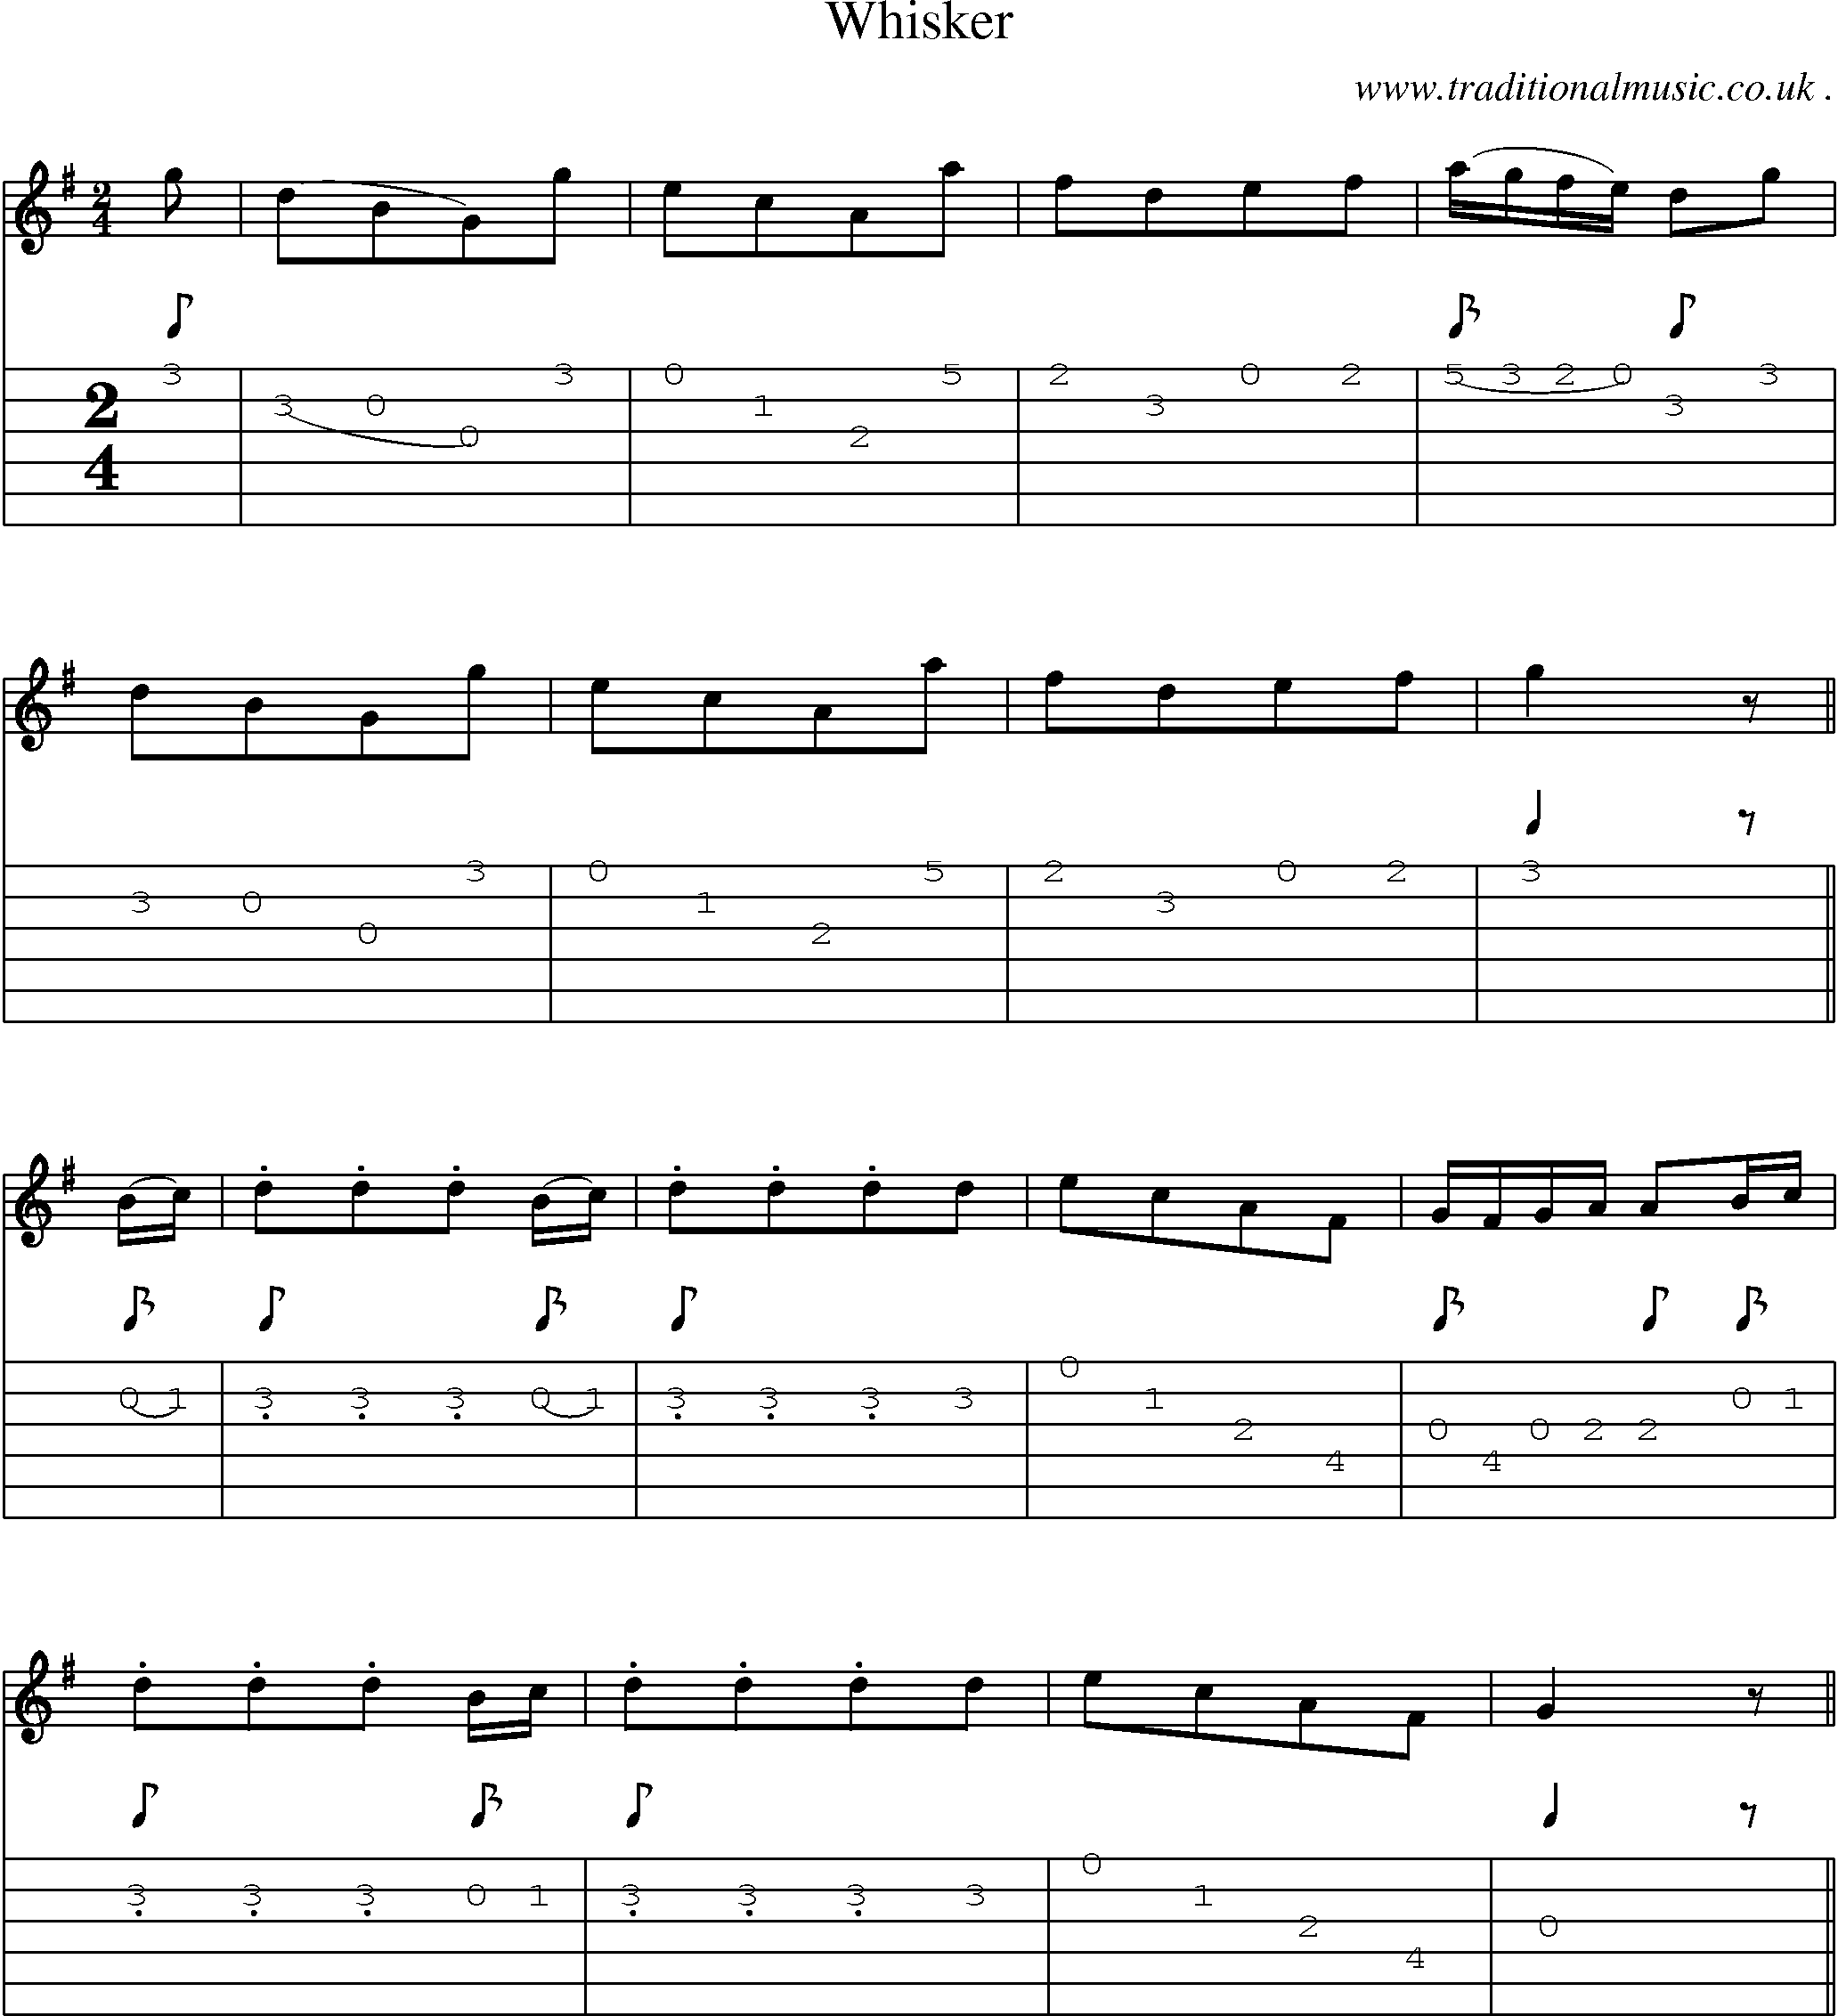 Sheet-Music and Guitar Tabs for Whisker